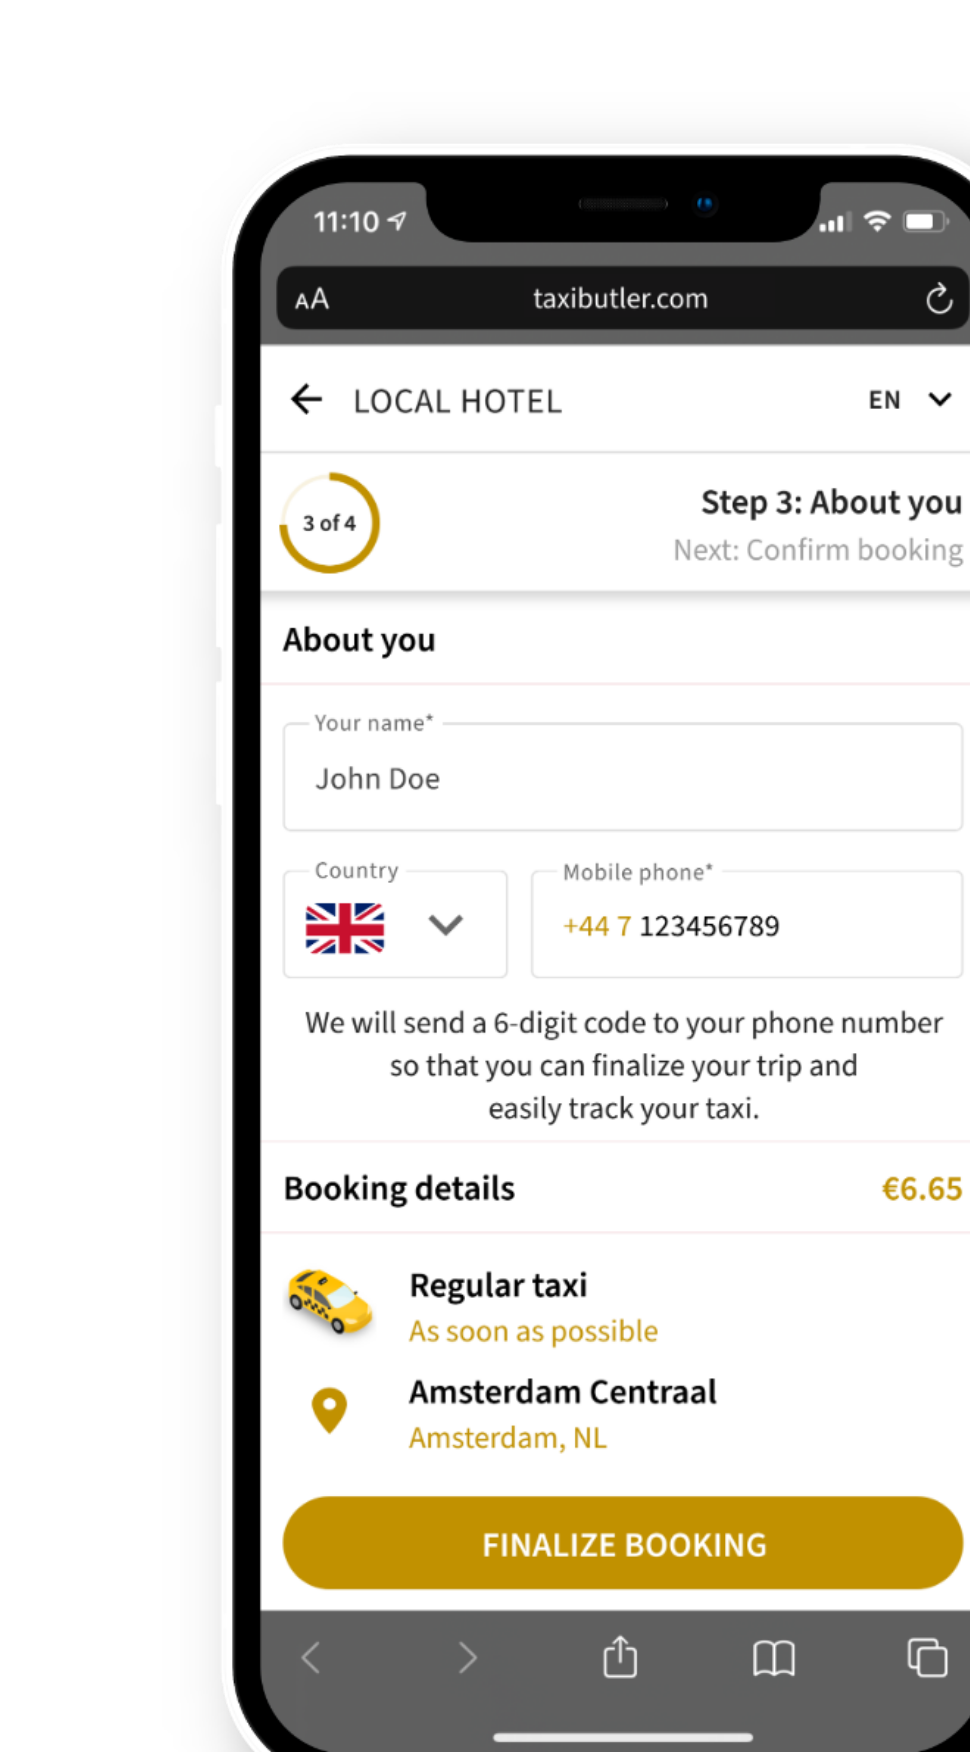 Taxi Butler QR SMS authentication